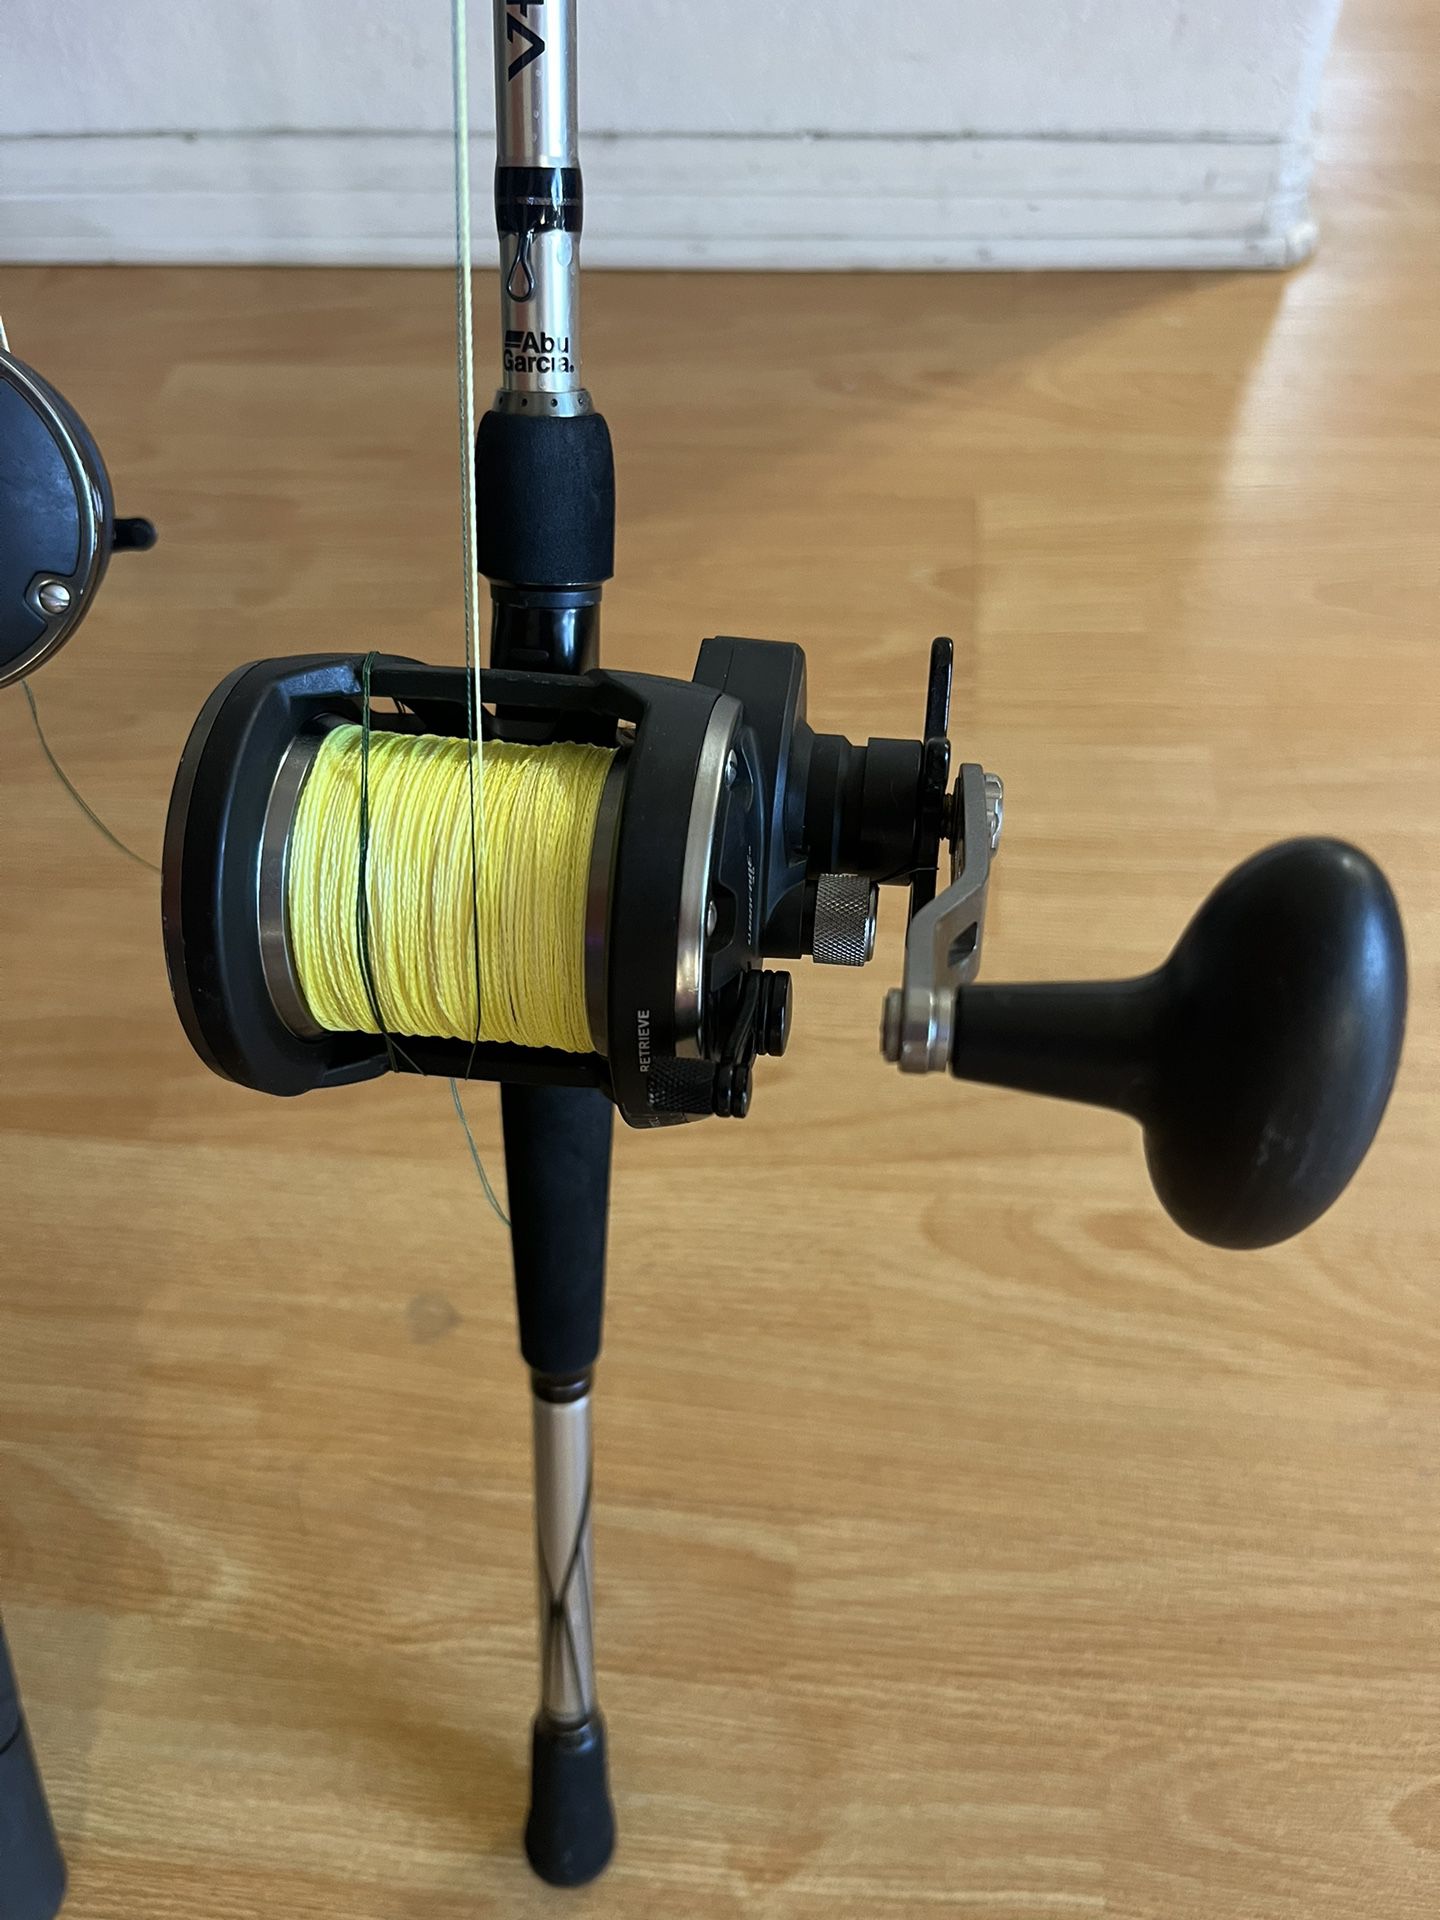 Fishing Reel (not The Fishing Racket) If You Buy both Reel You Will Get A Fishing Racket For Free